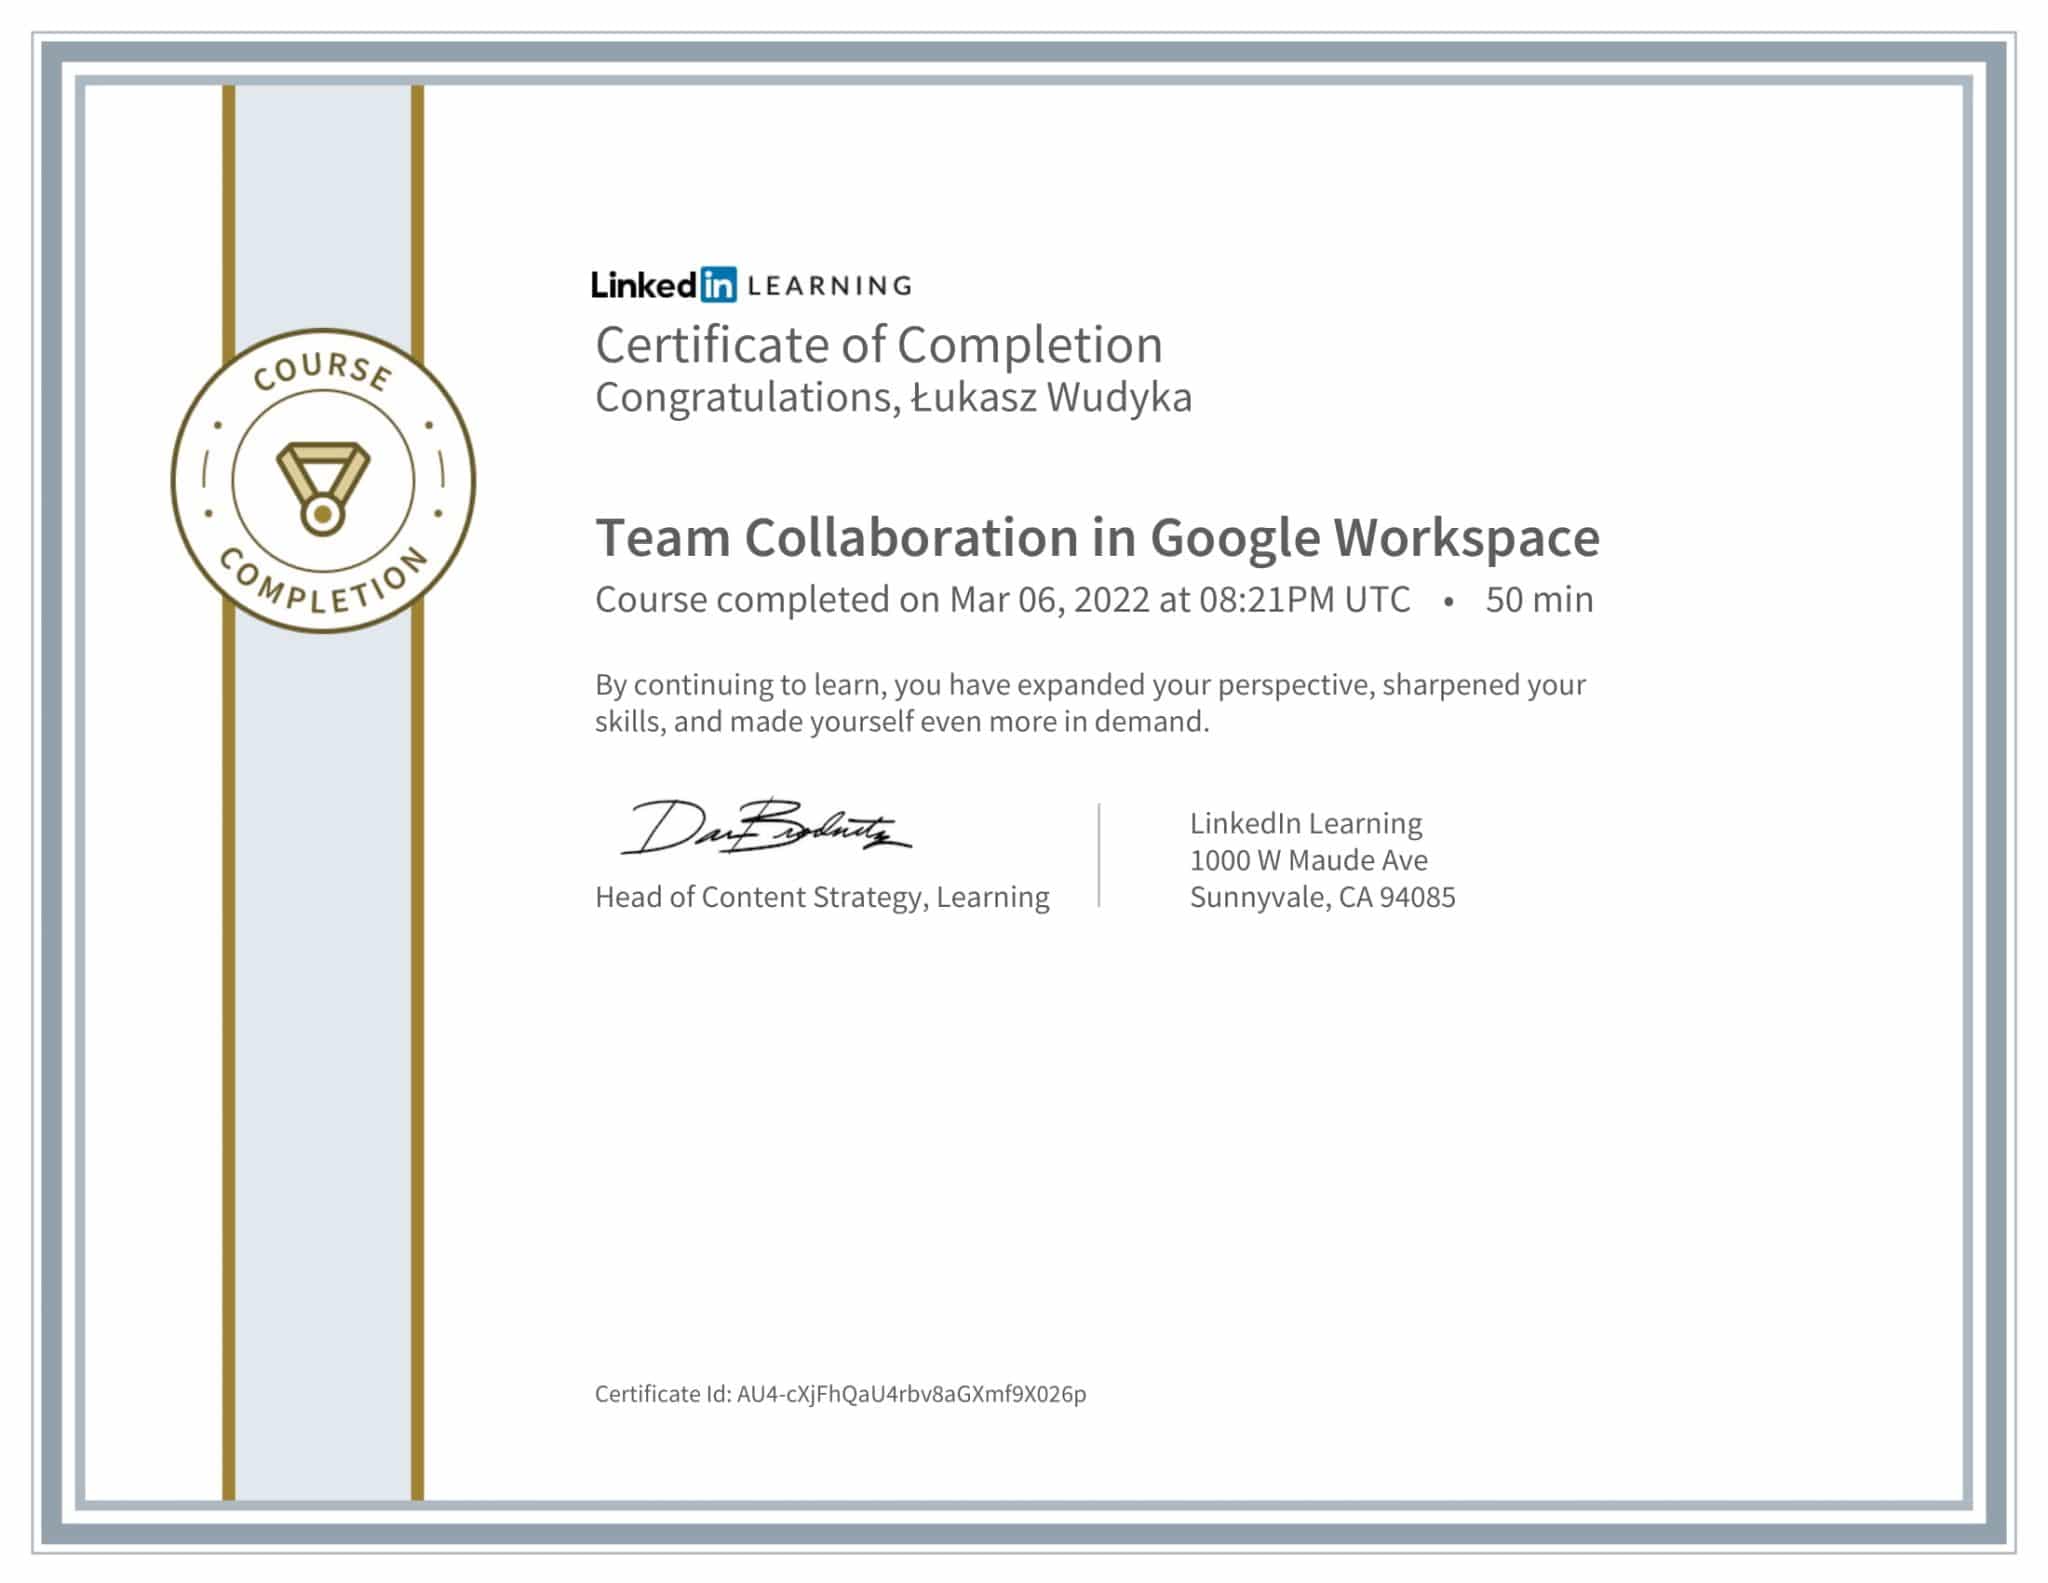 CertificateOfCompletion_Team Collaboration in Google Workspace-1